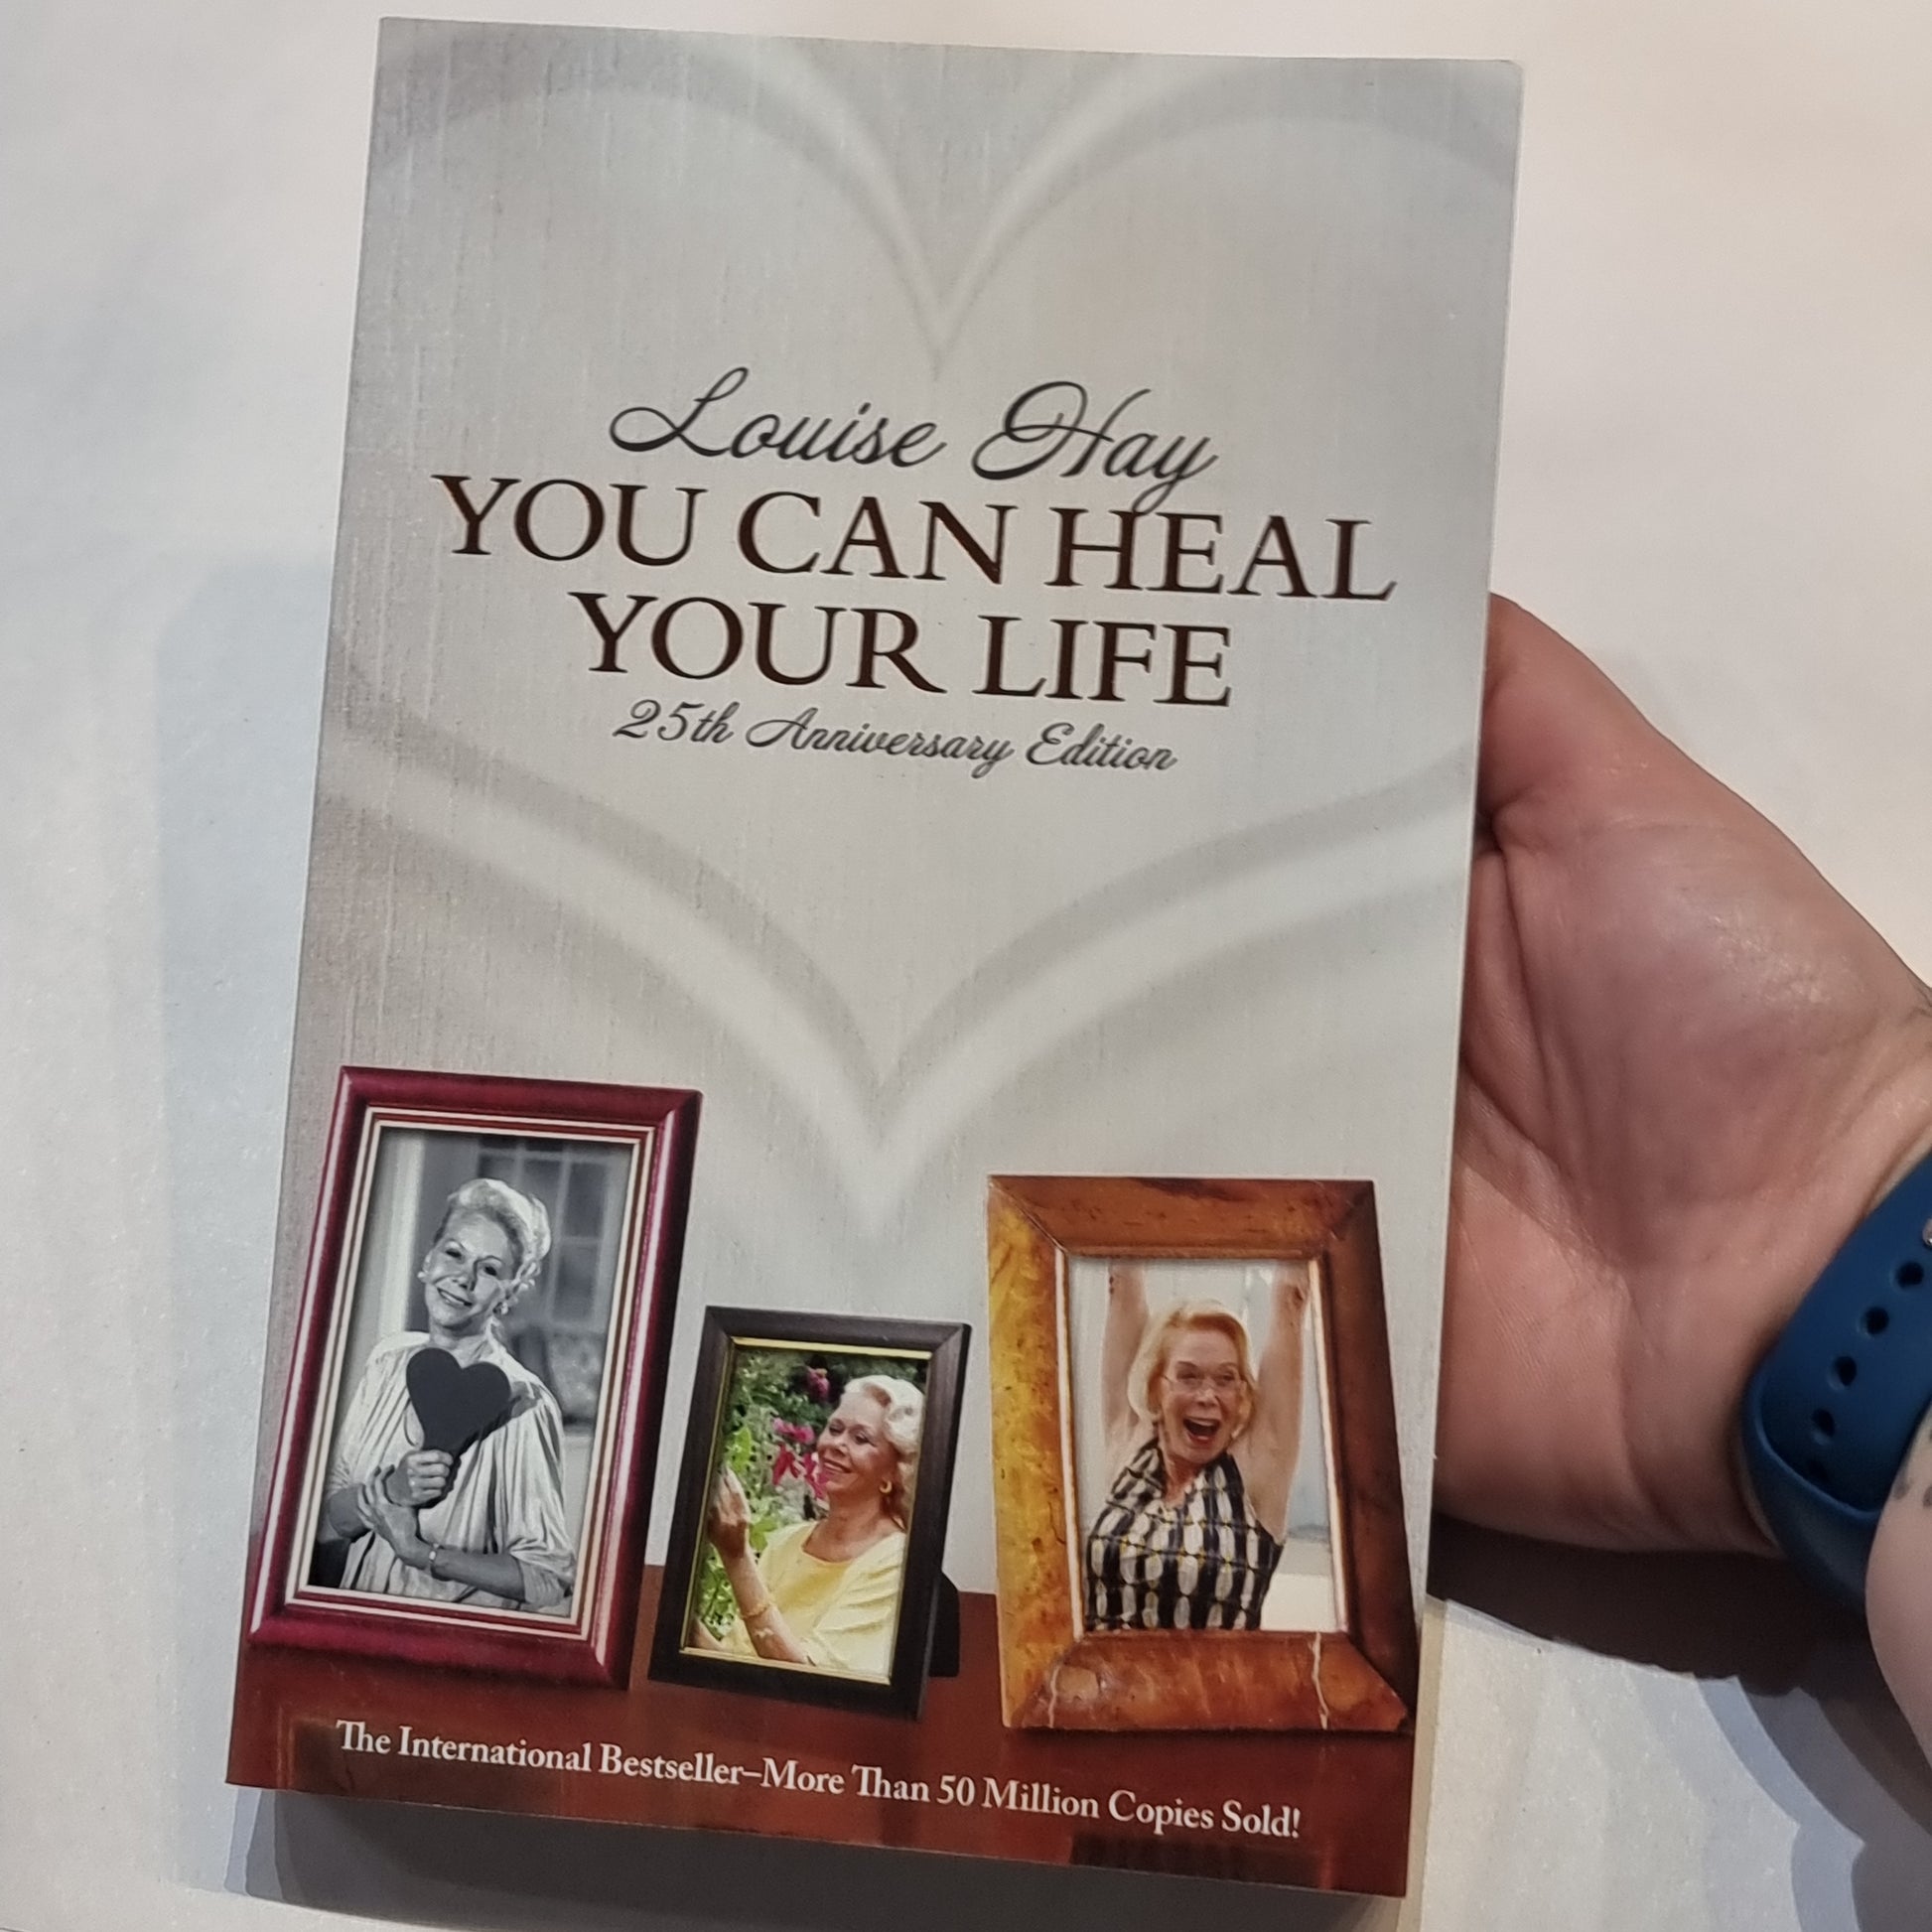 You can heal your life 25th anniversary edition - Rivendell Shop